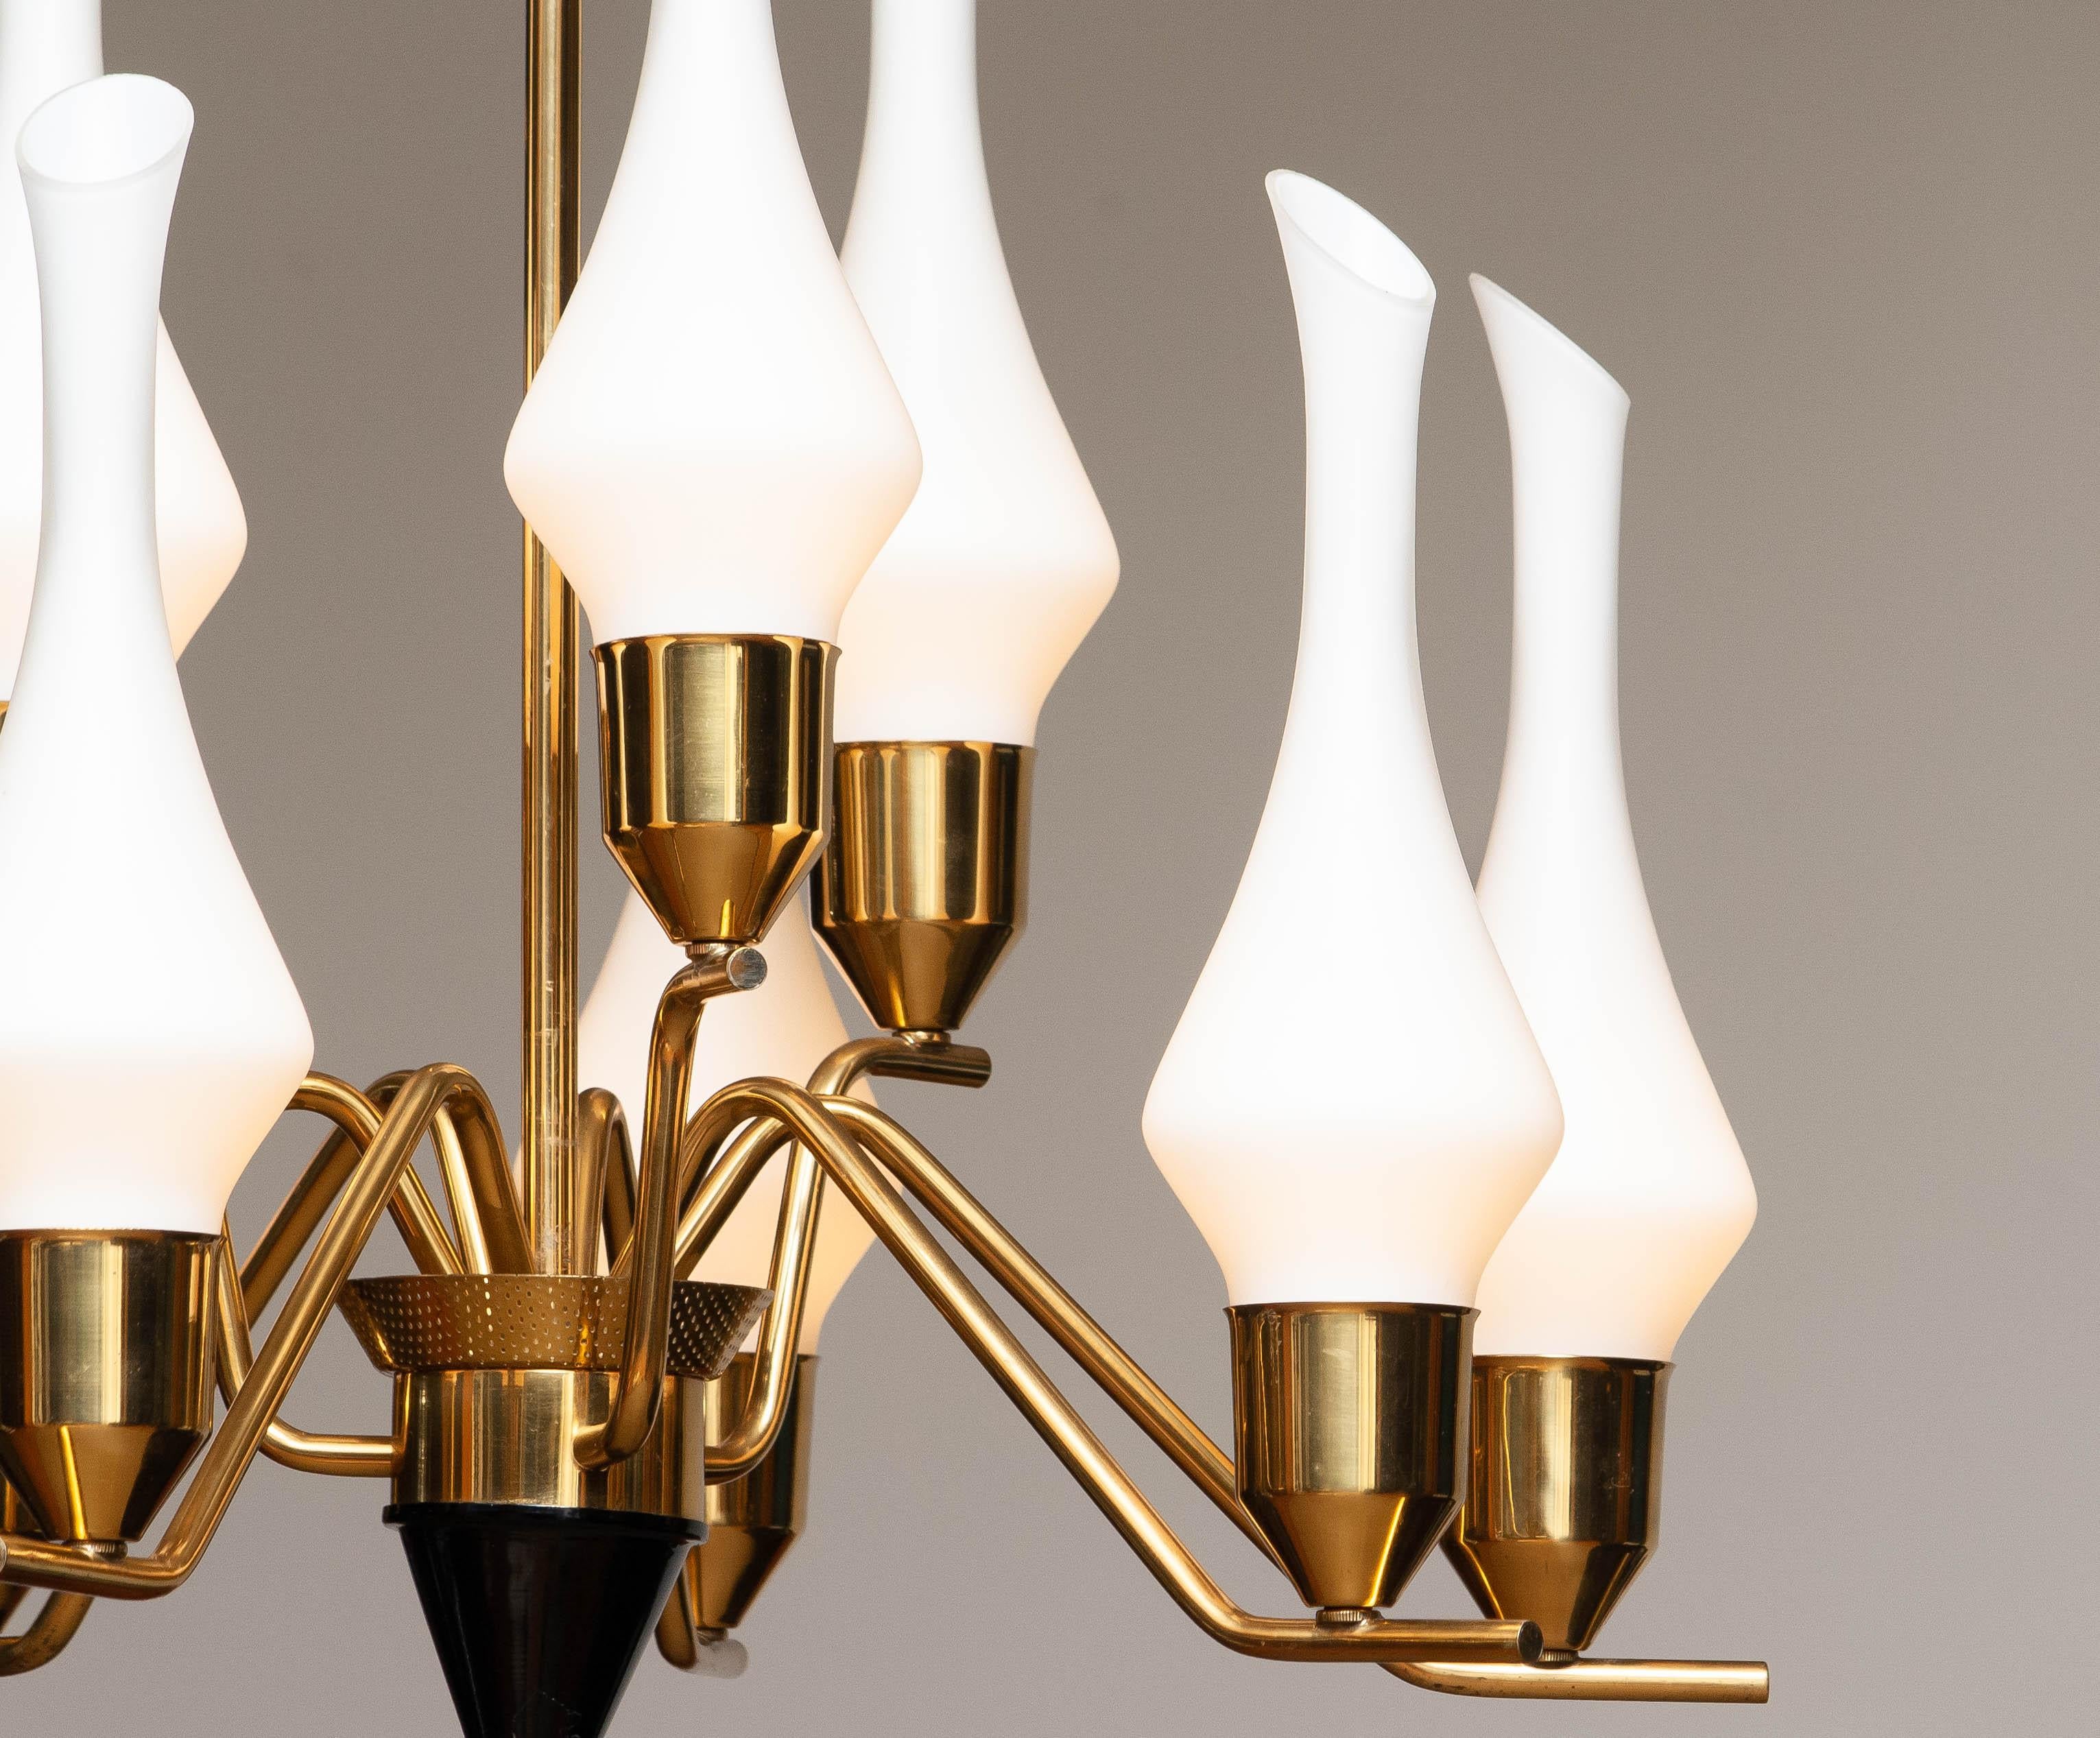 Mid-20th Century 1960's Swedish Brass Chandelier with White Frosted Organic Glass Vases, ASEA